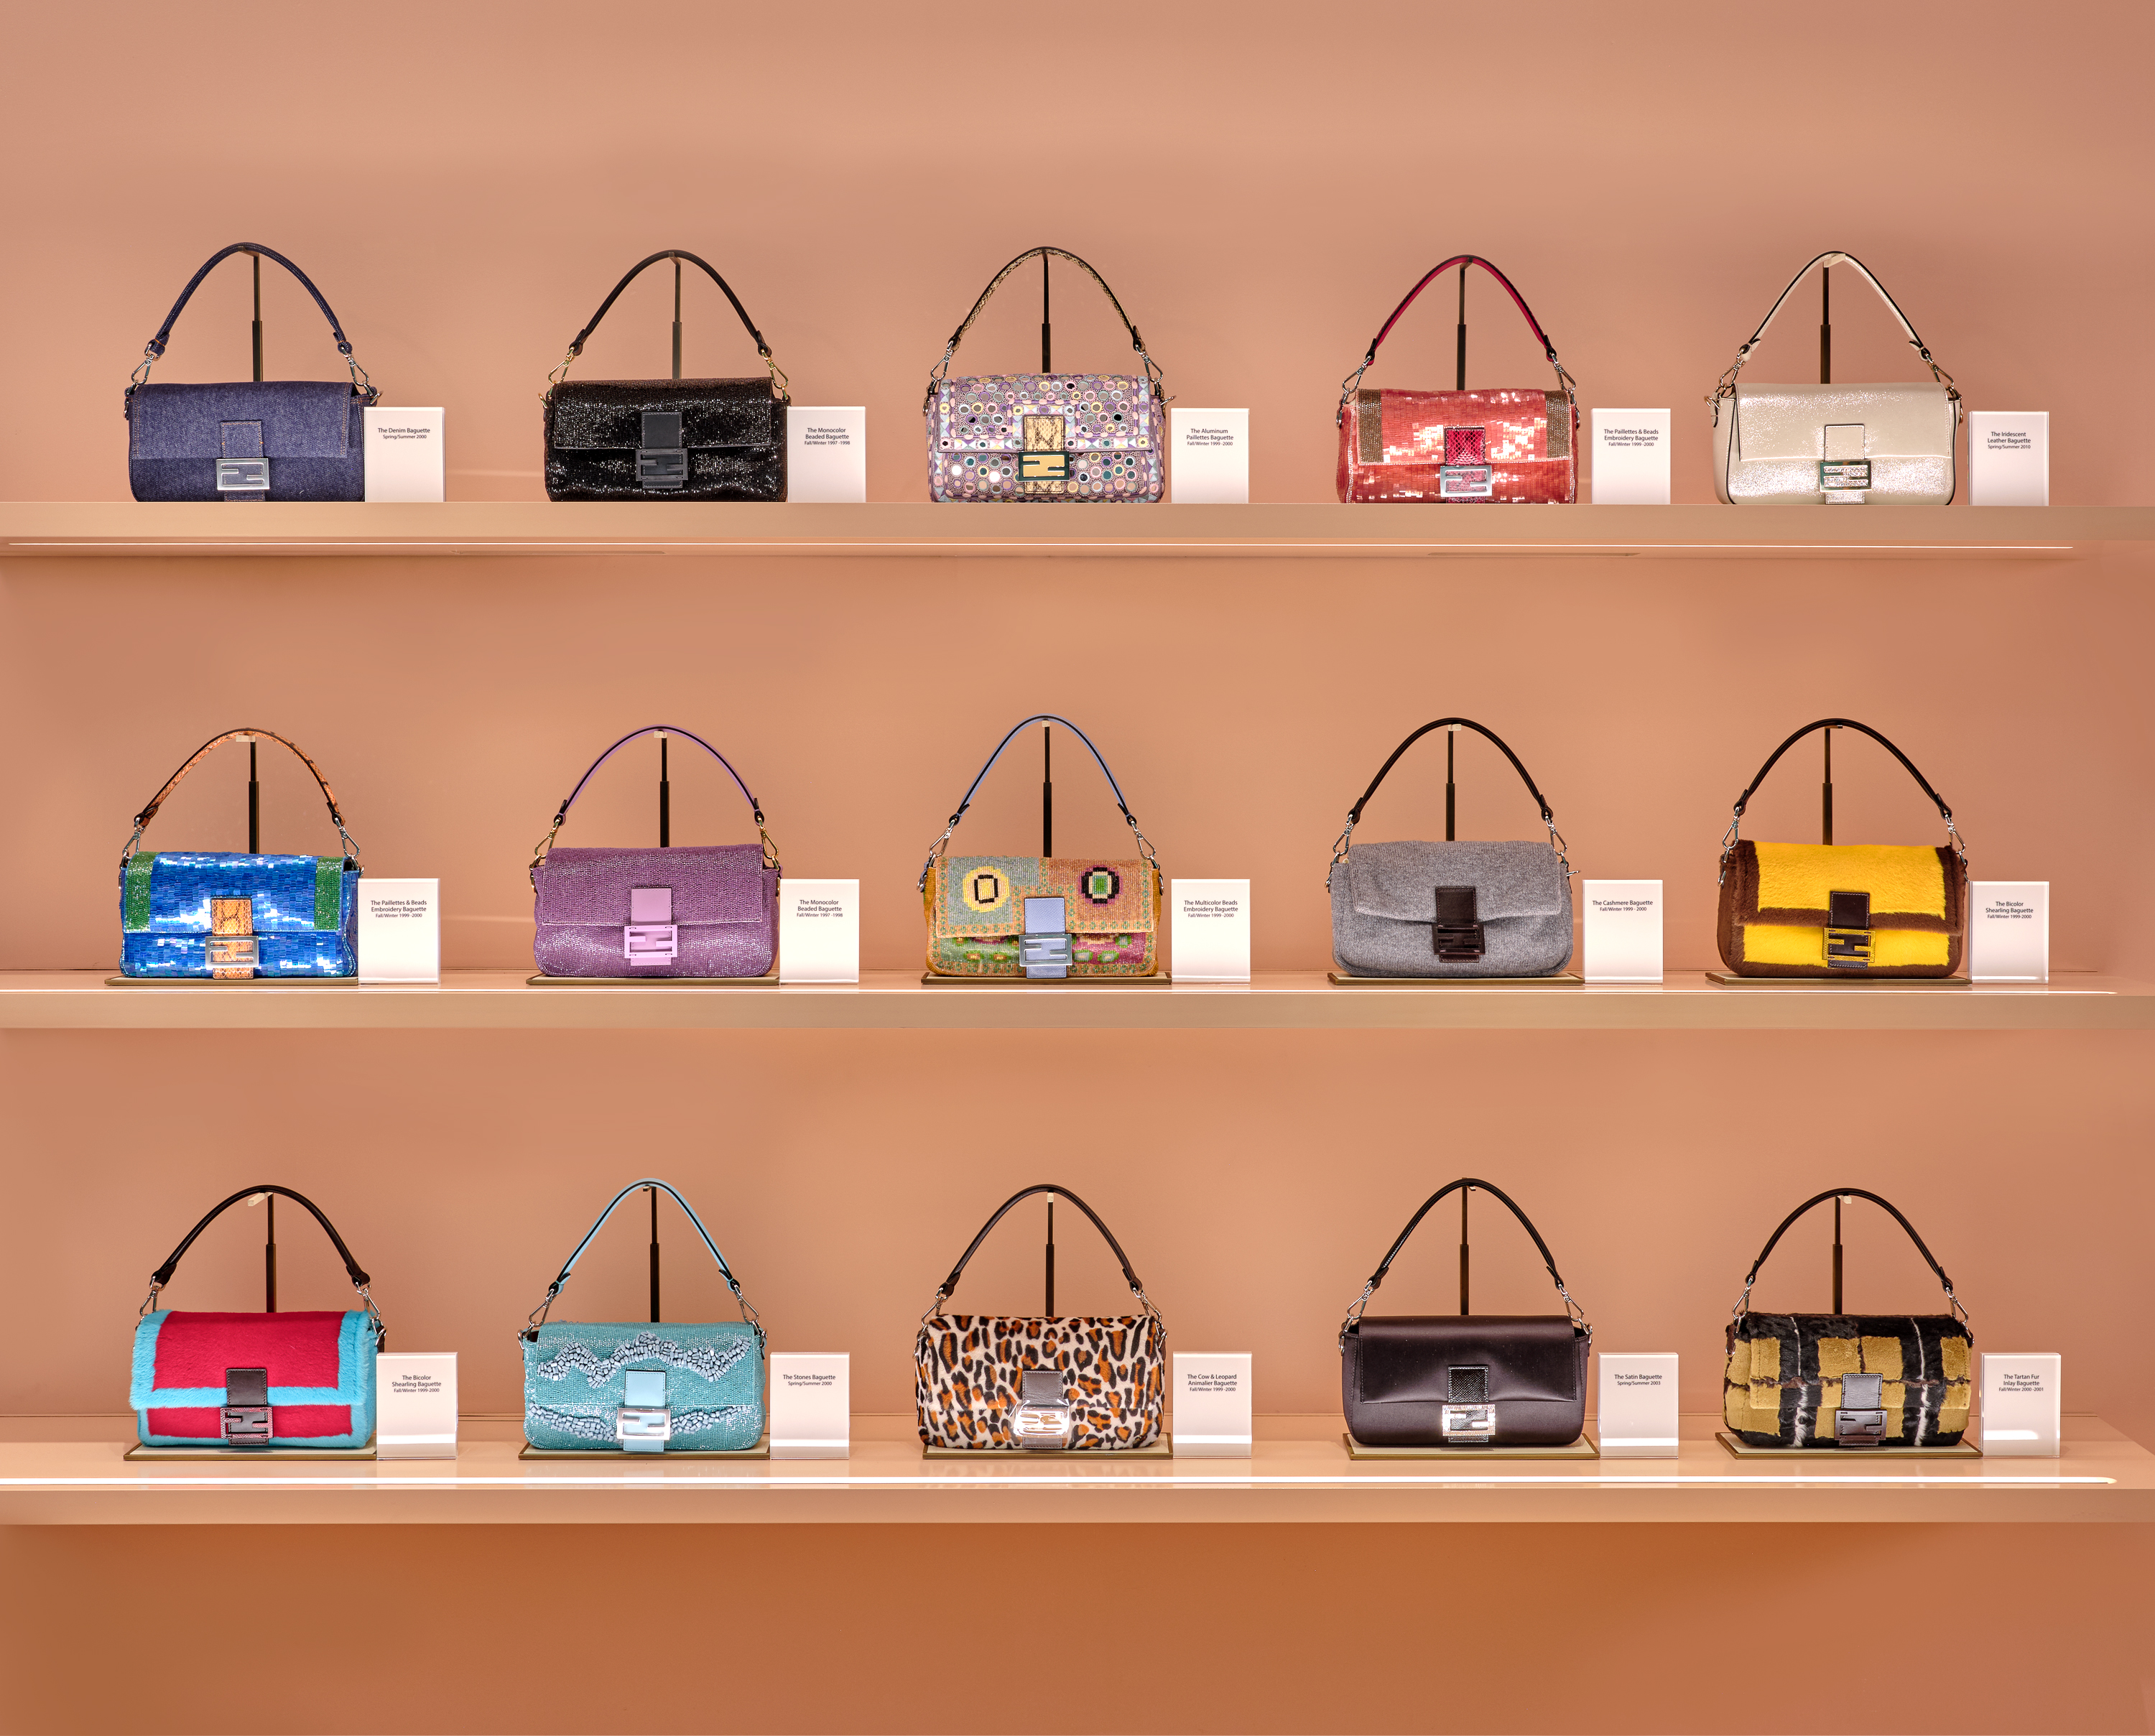 Fendi Opens NYC Pop-Up For the 25th Anniversary of the Baguette Bag — Fendi  Baguette